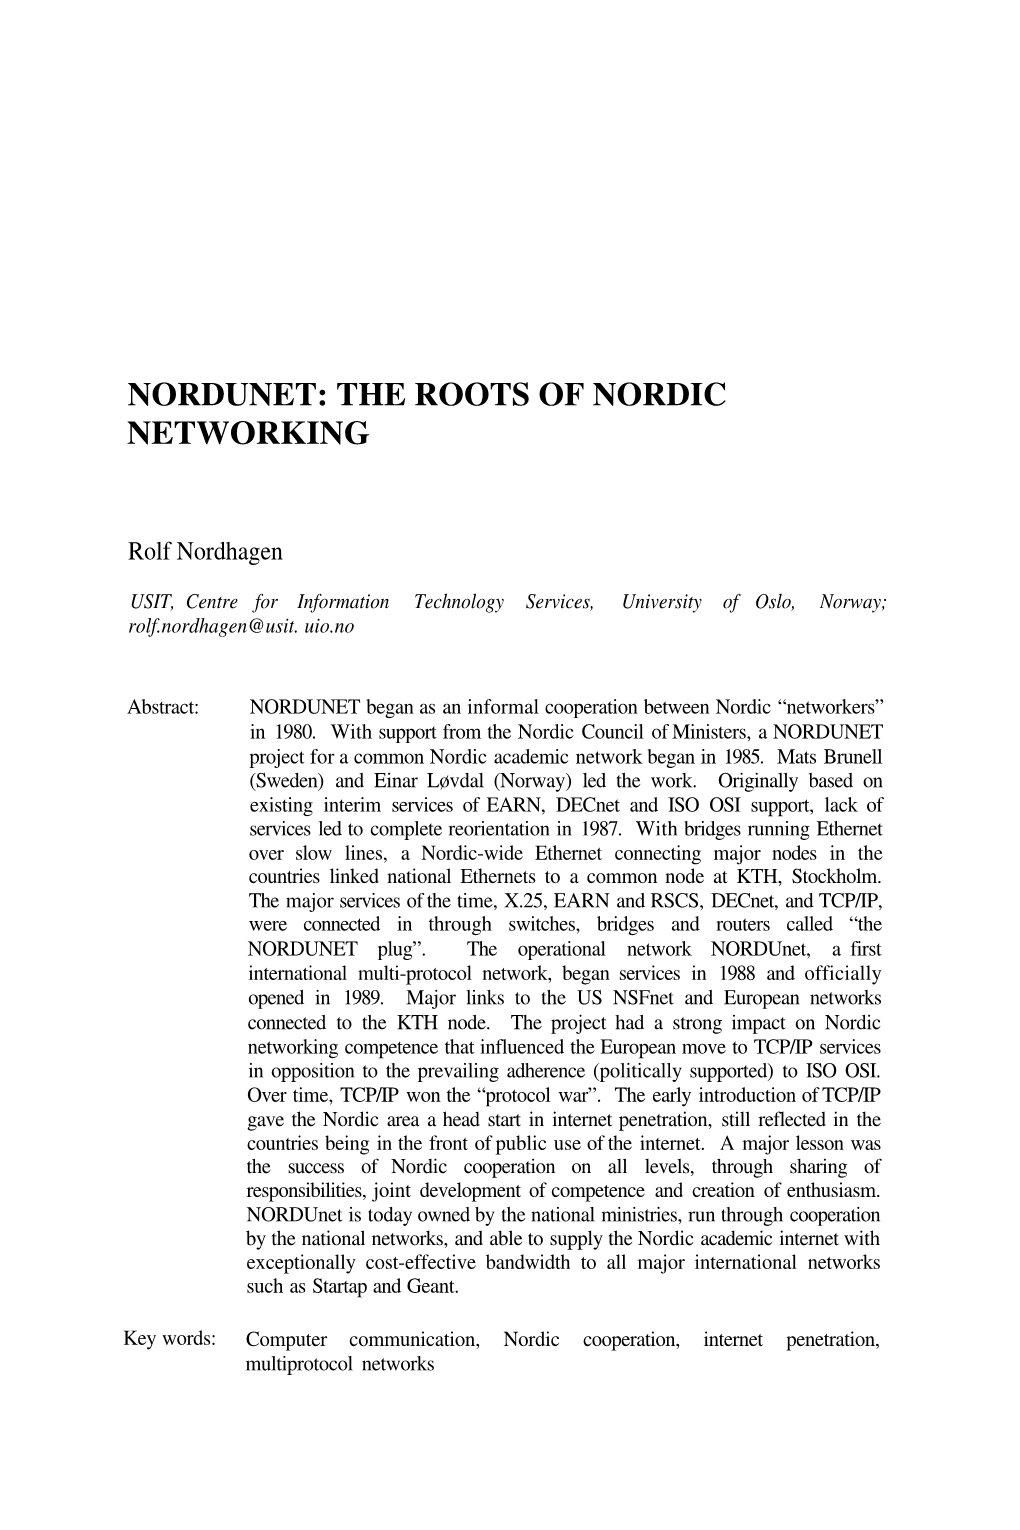 NORDUNET: the Roots of Nordic Networking by Rolf